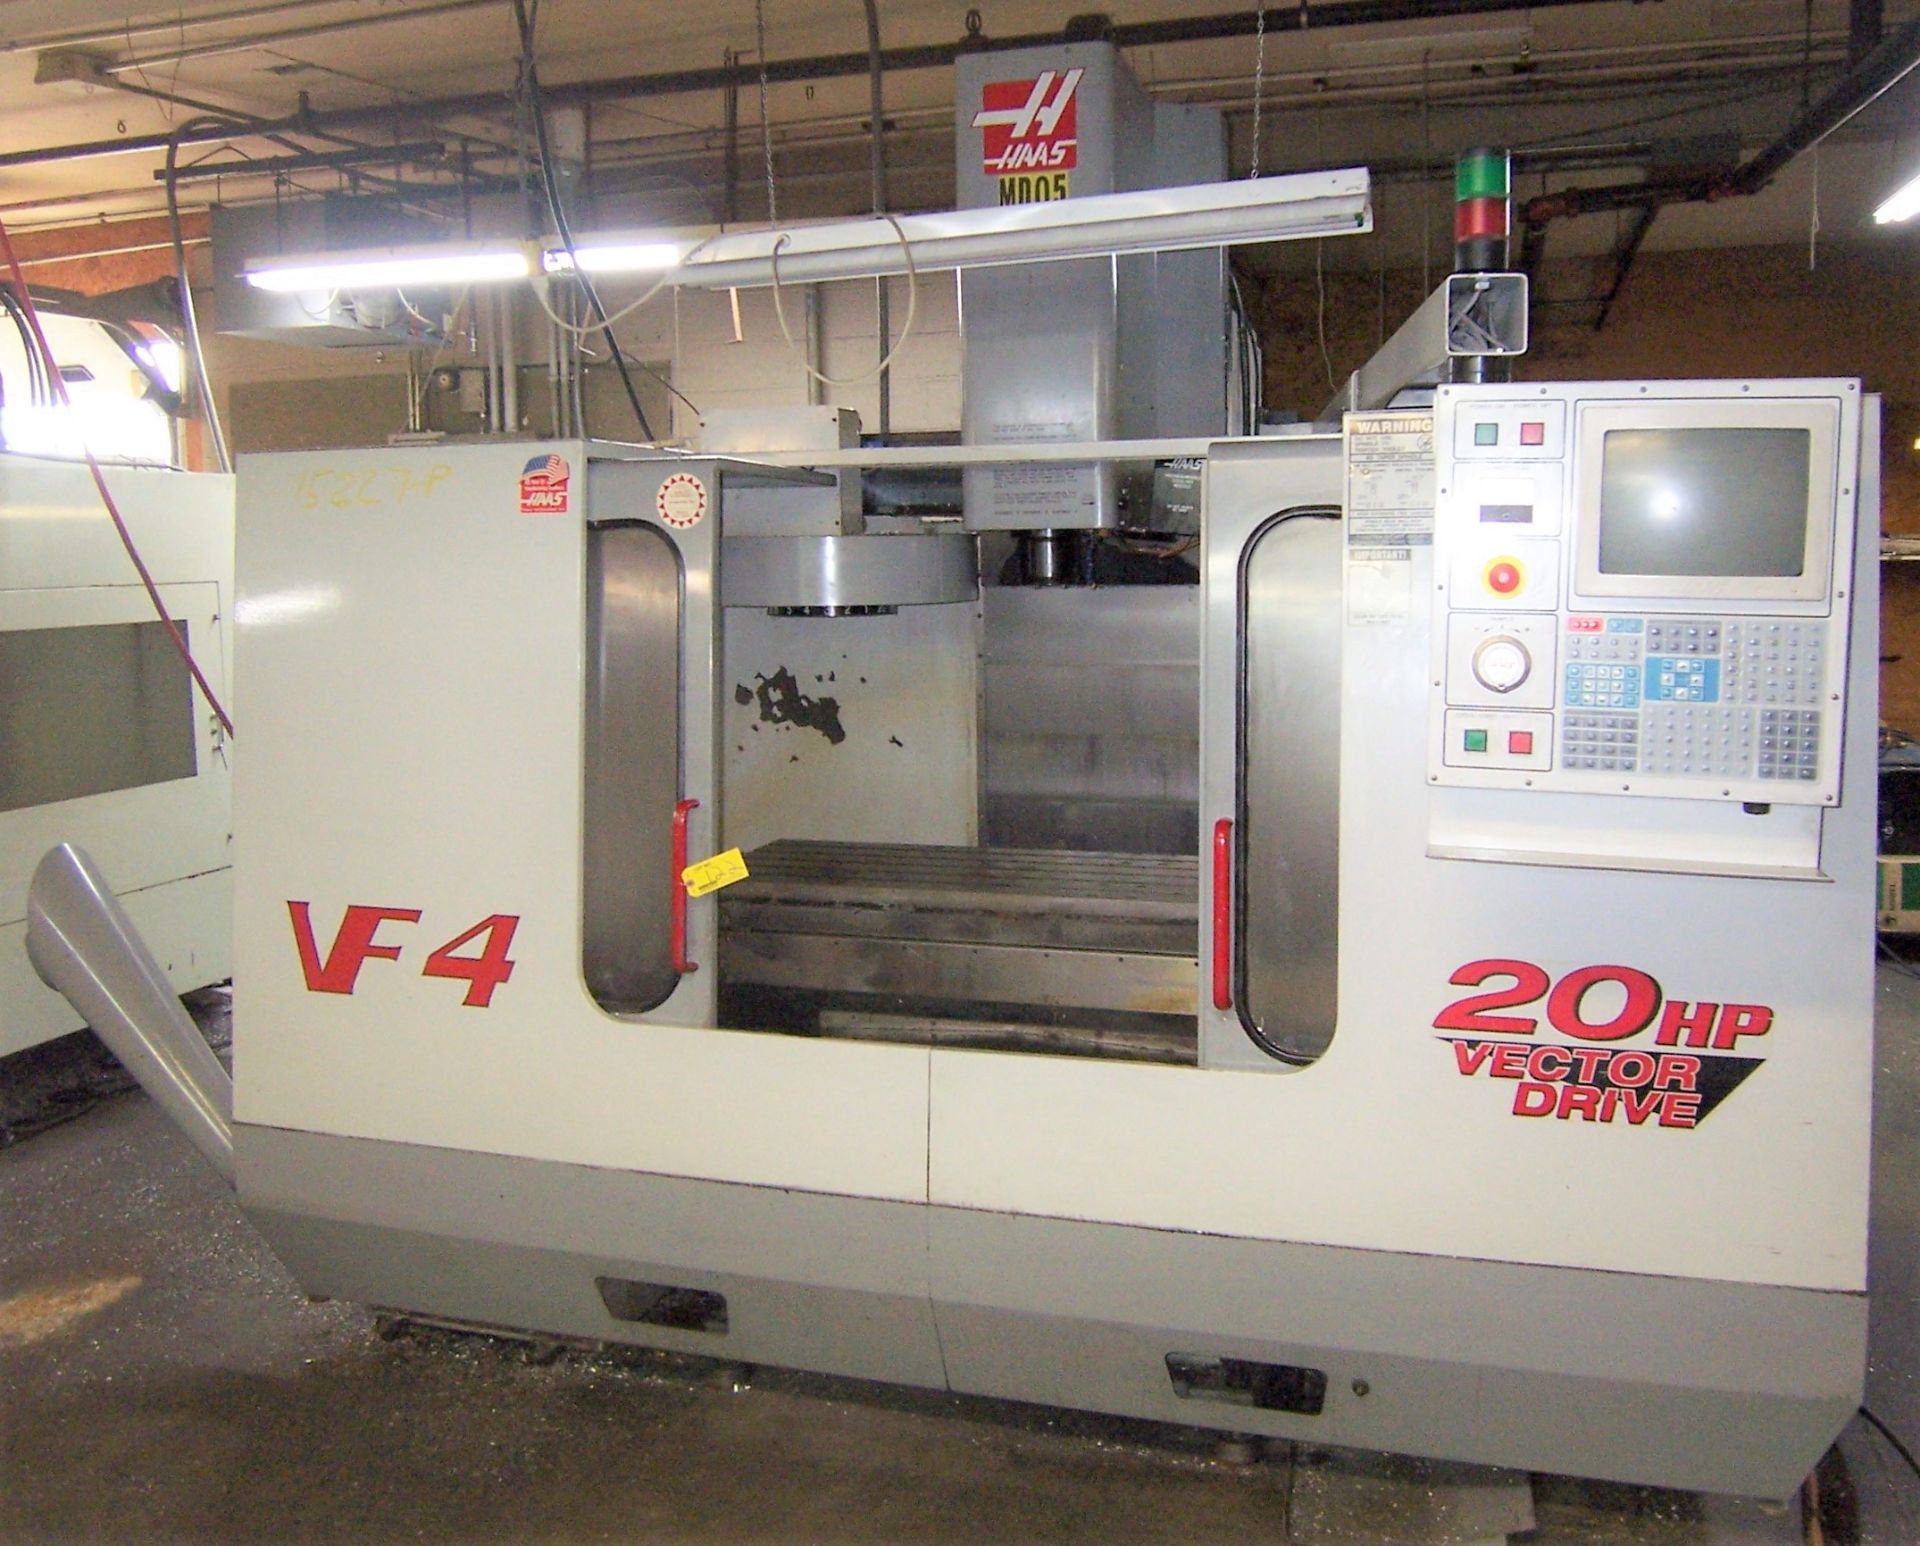 HAAS MDL. VF4 CNC VERTICAL MACHINING CENTER WITH 20-POSITION AUTOMATIC TOOL CHANGER, 20 HP VECTOR